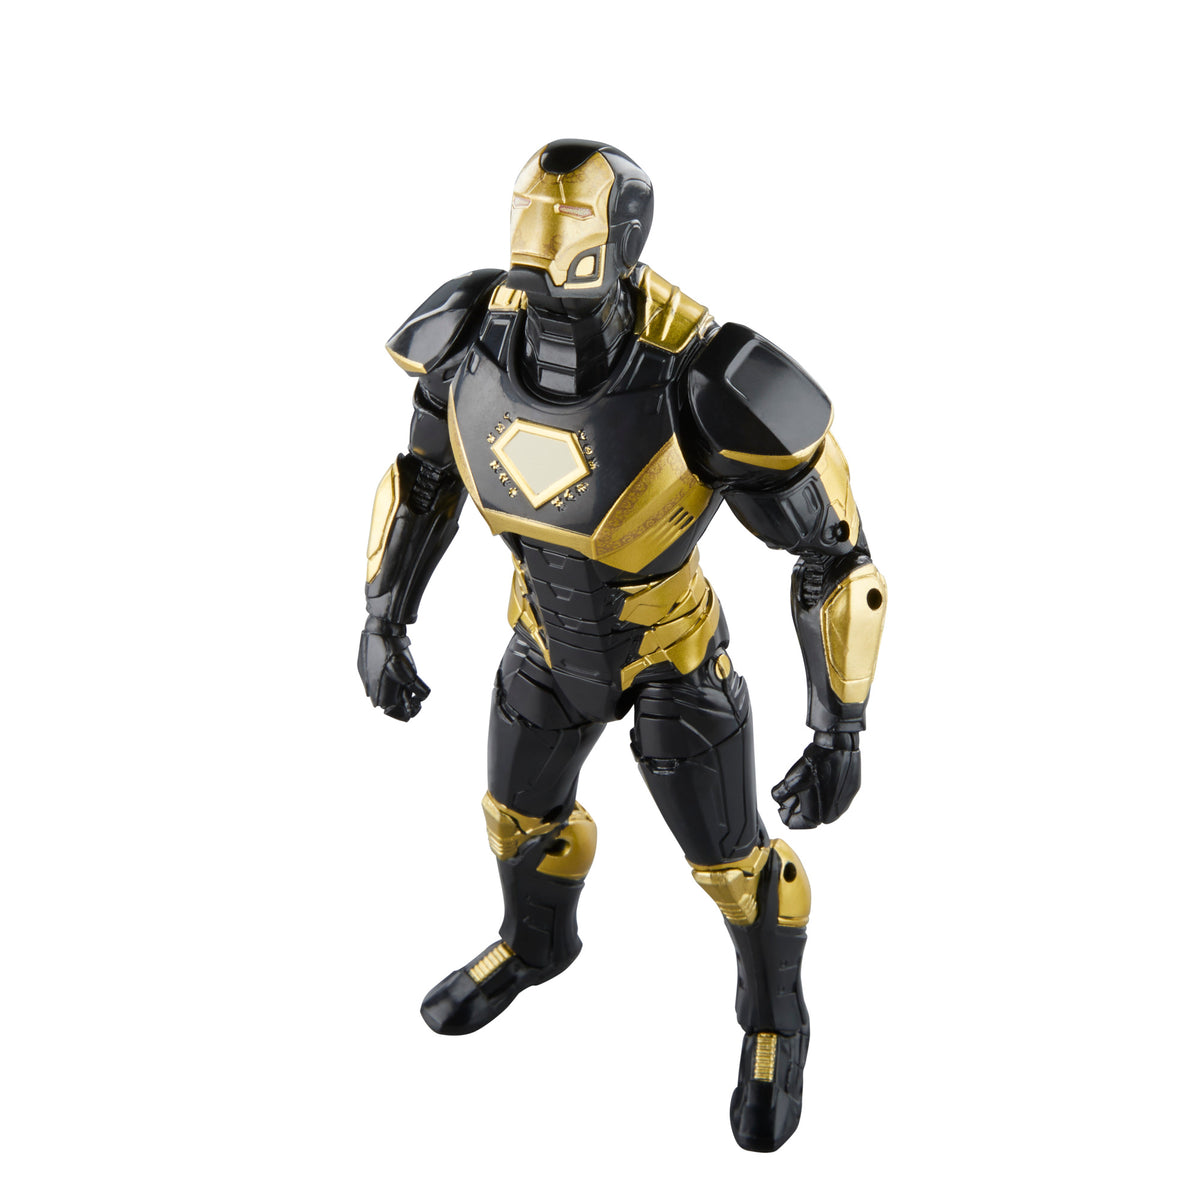 2K and Marvel Showcase Exclusive Marvel's Midnight Suns Iron Man